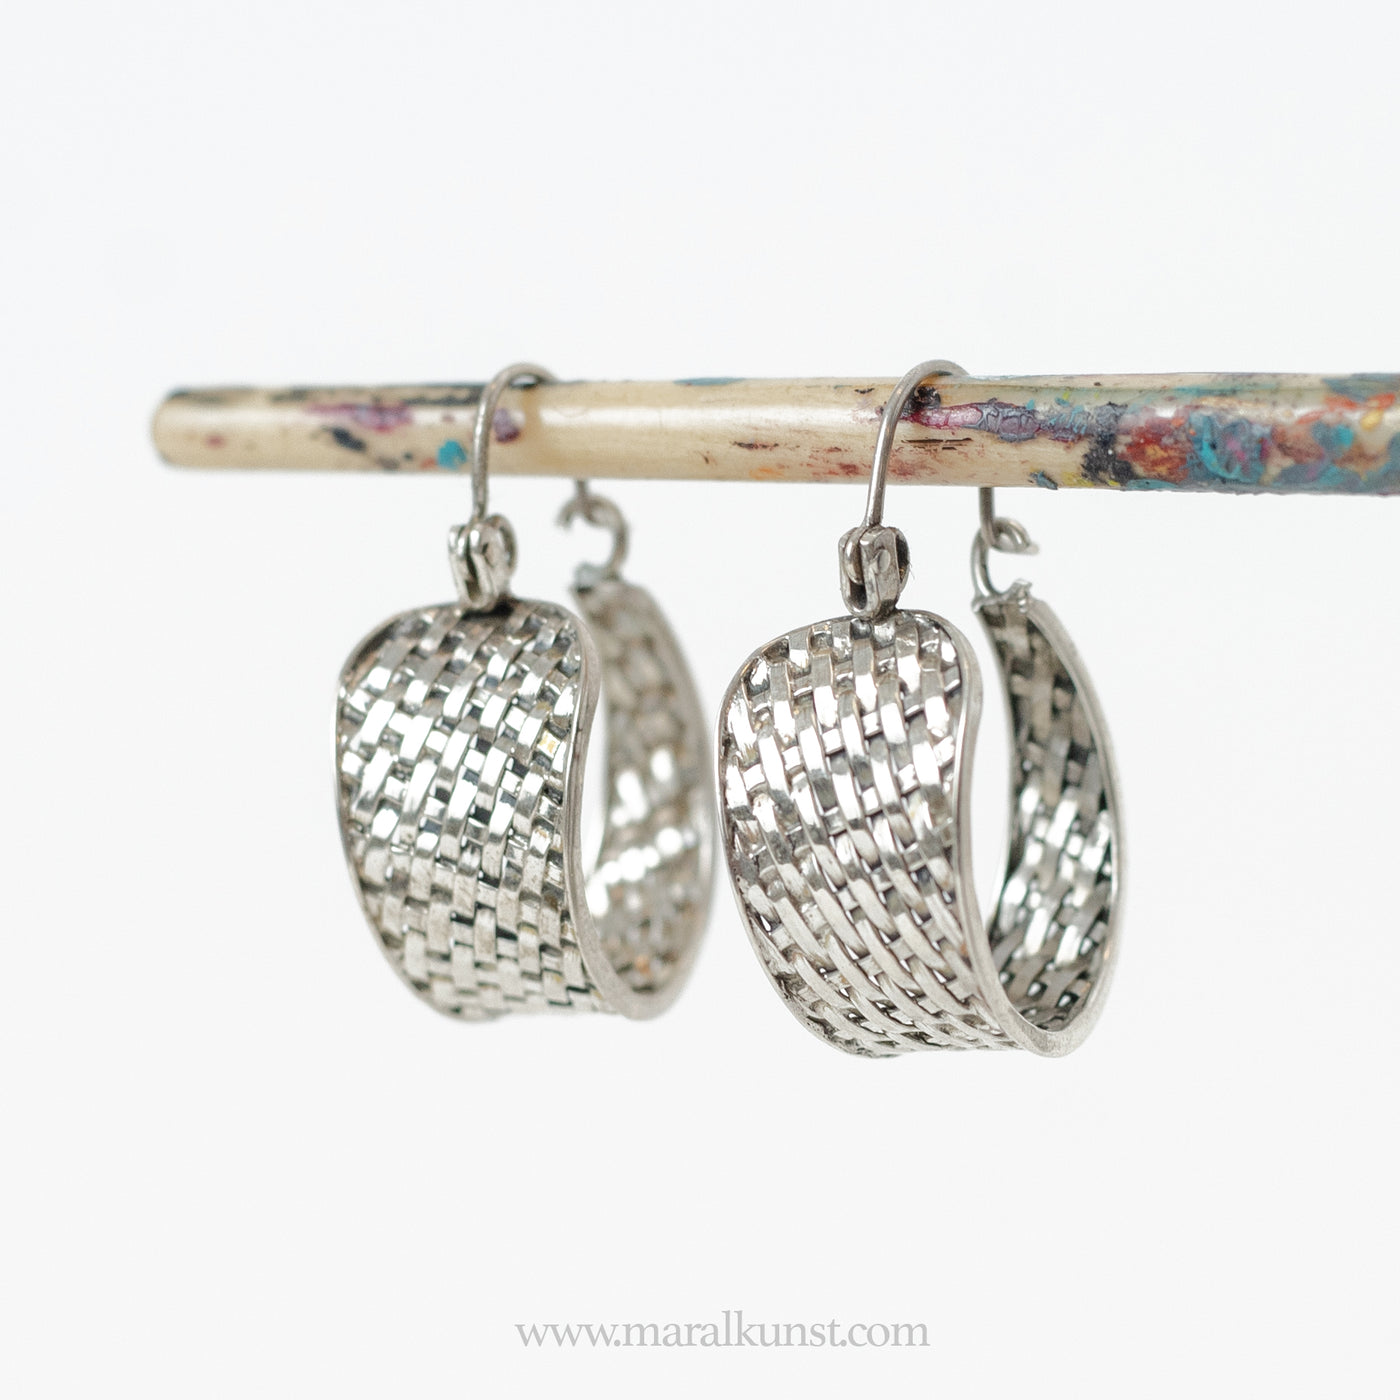 Straw knitting Mexican 925 silver earrings